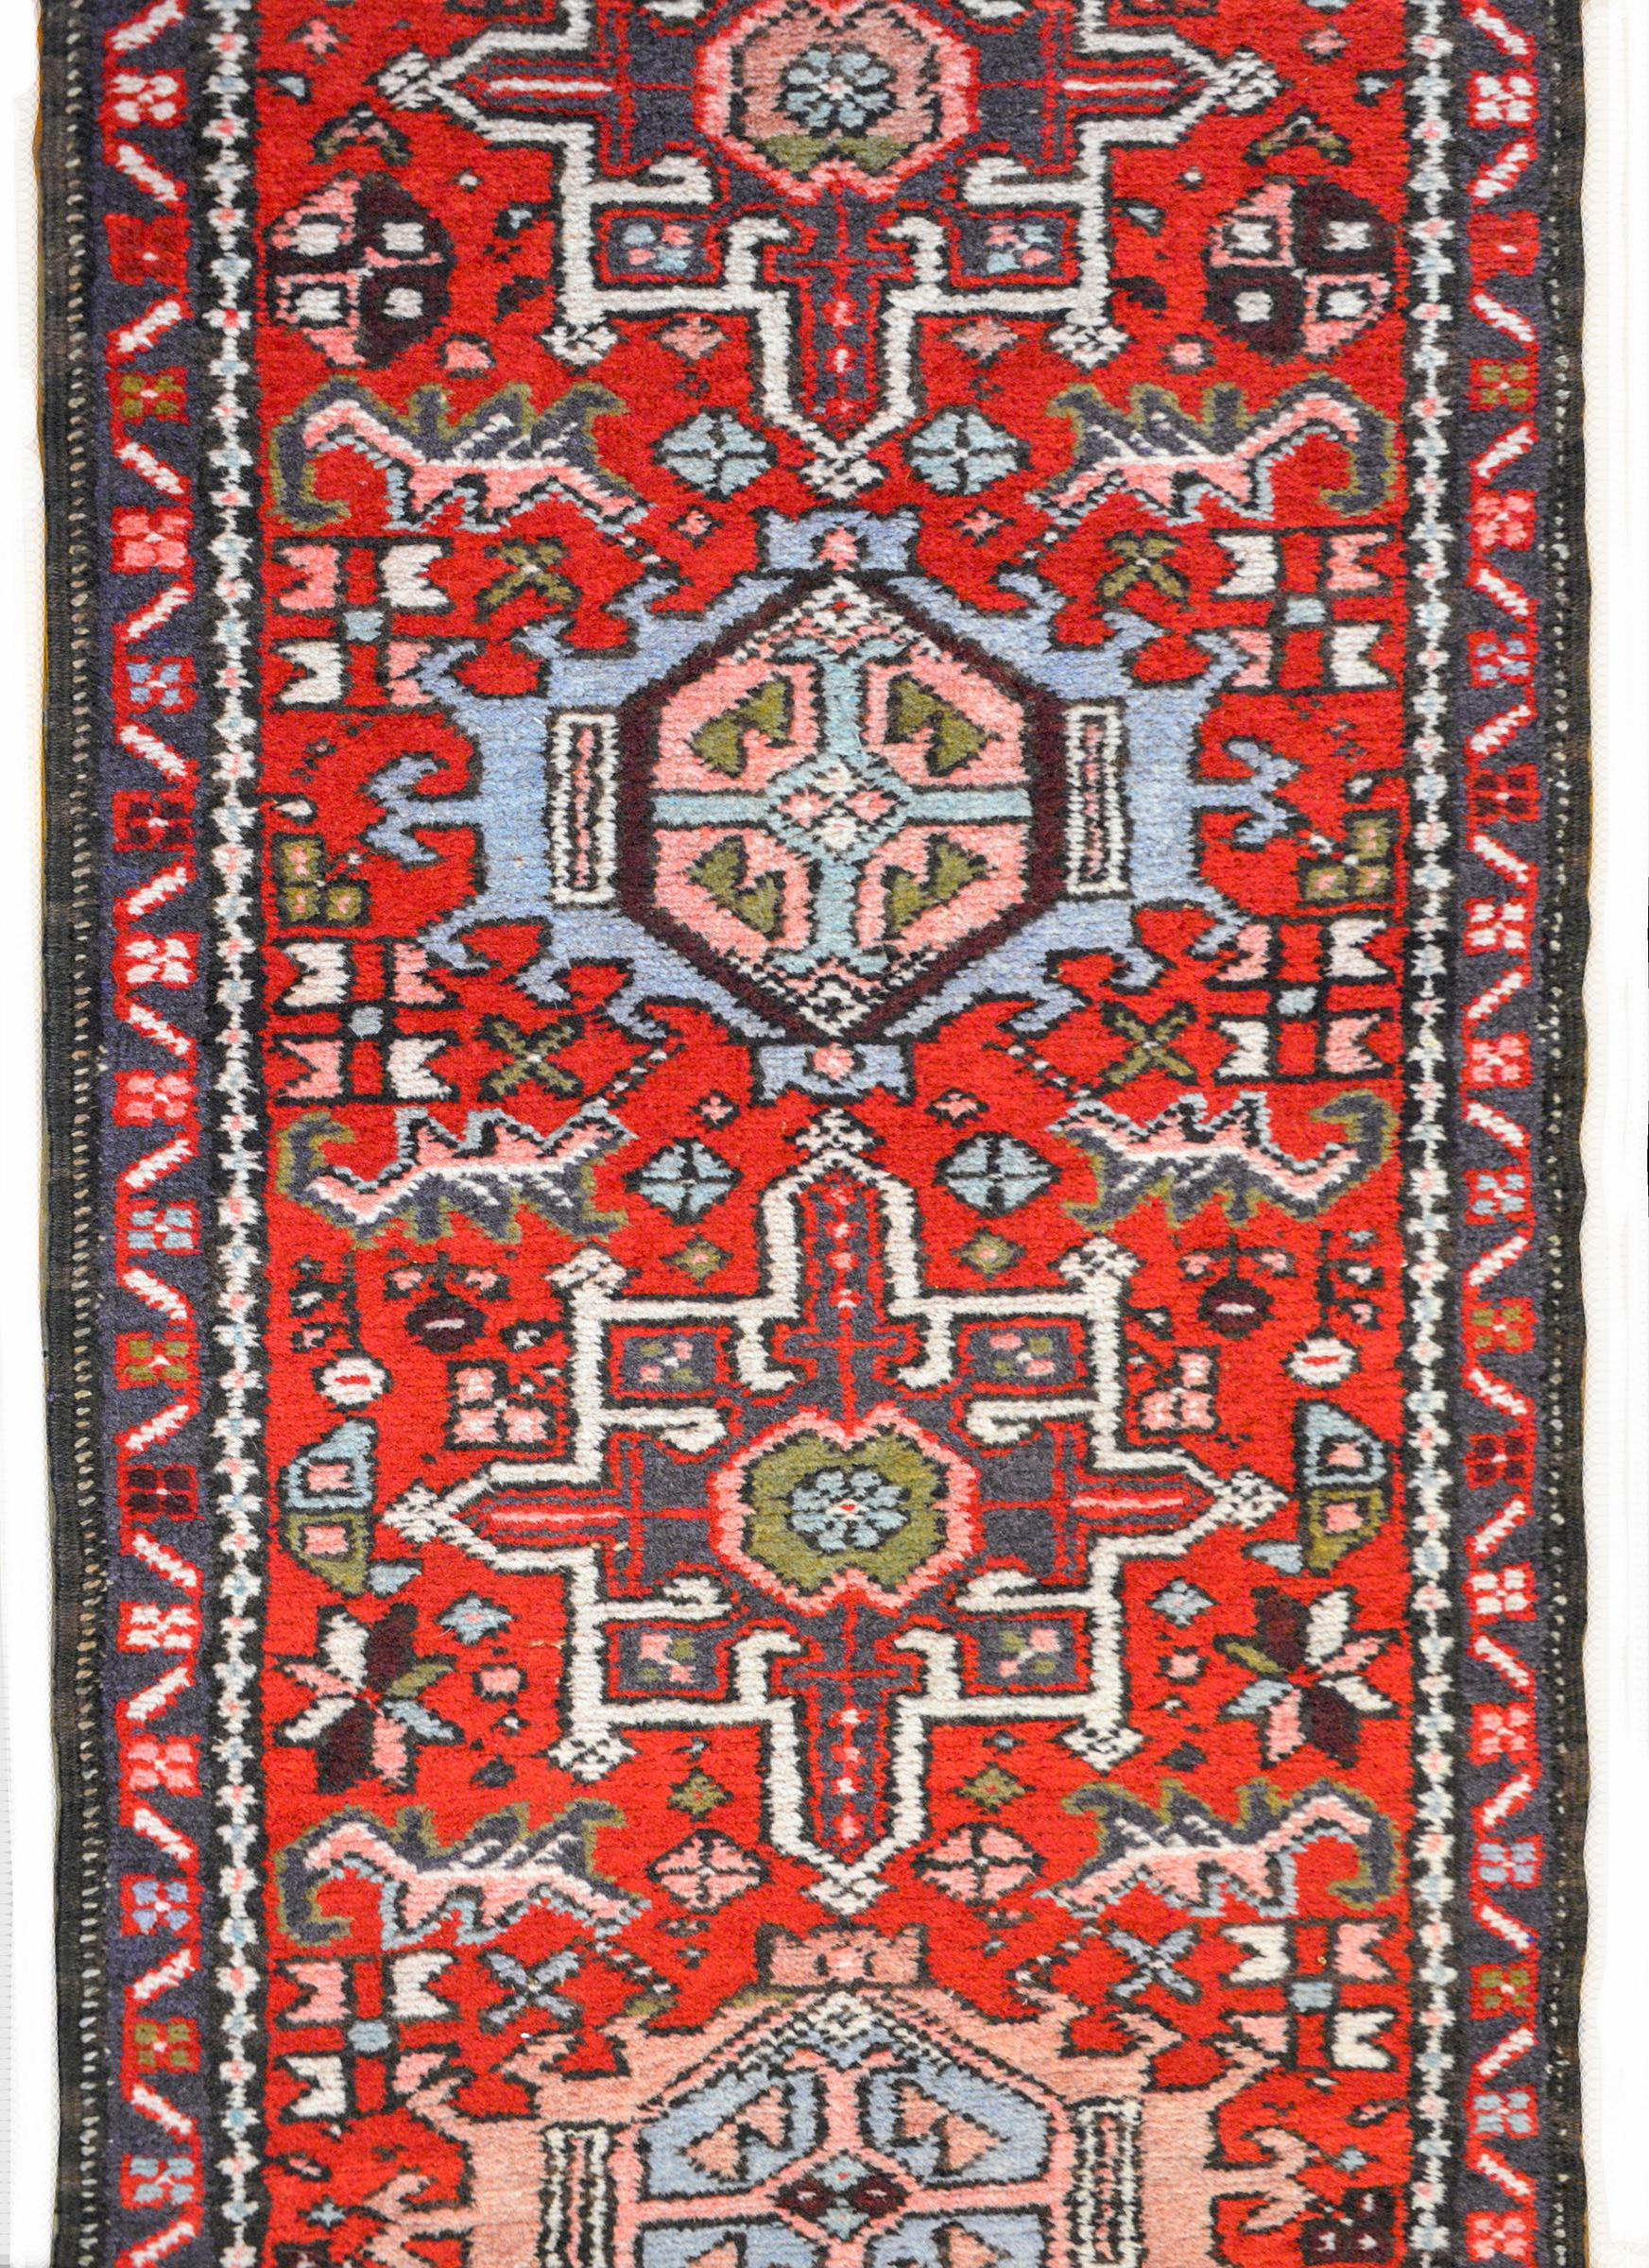 A wonderful mid-20th century Persian Karadja runner with several stylized floral medallions woven in myriad colors including indigo, pink, white, crimson, and green, amidst a field of more stylized flowers against a crimson background. The border is